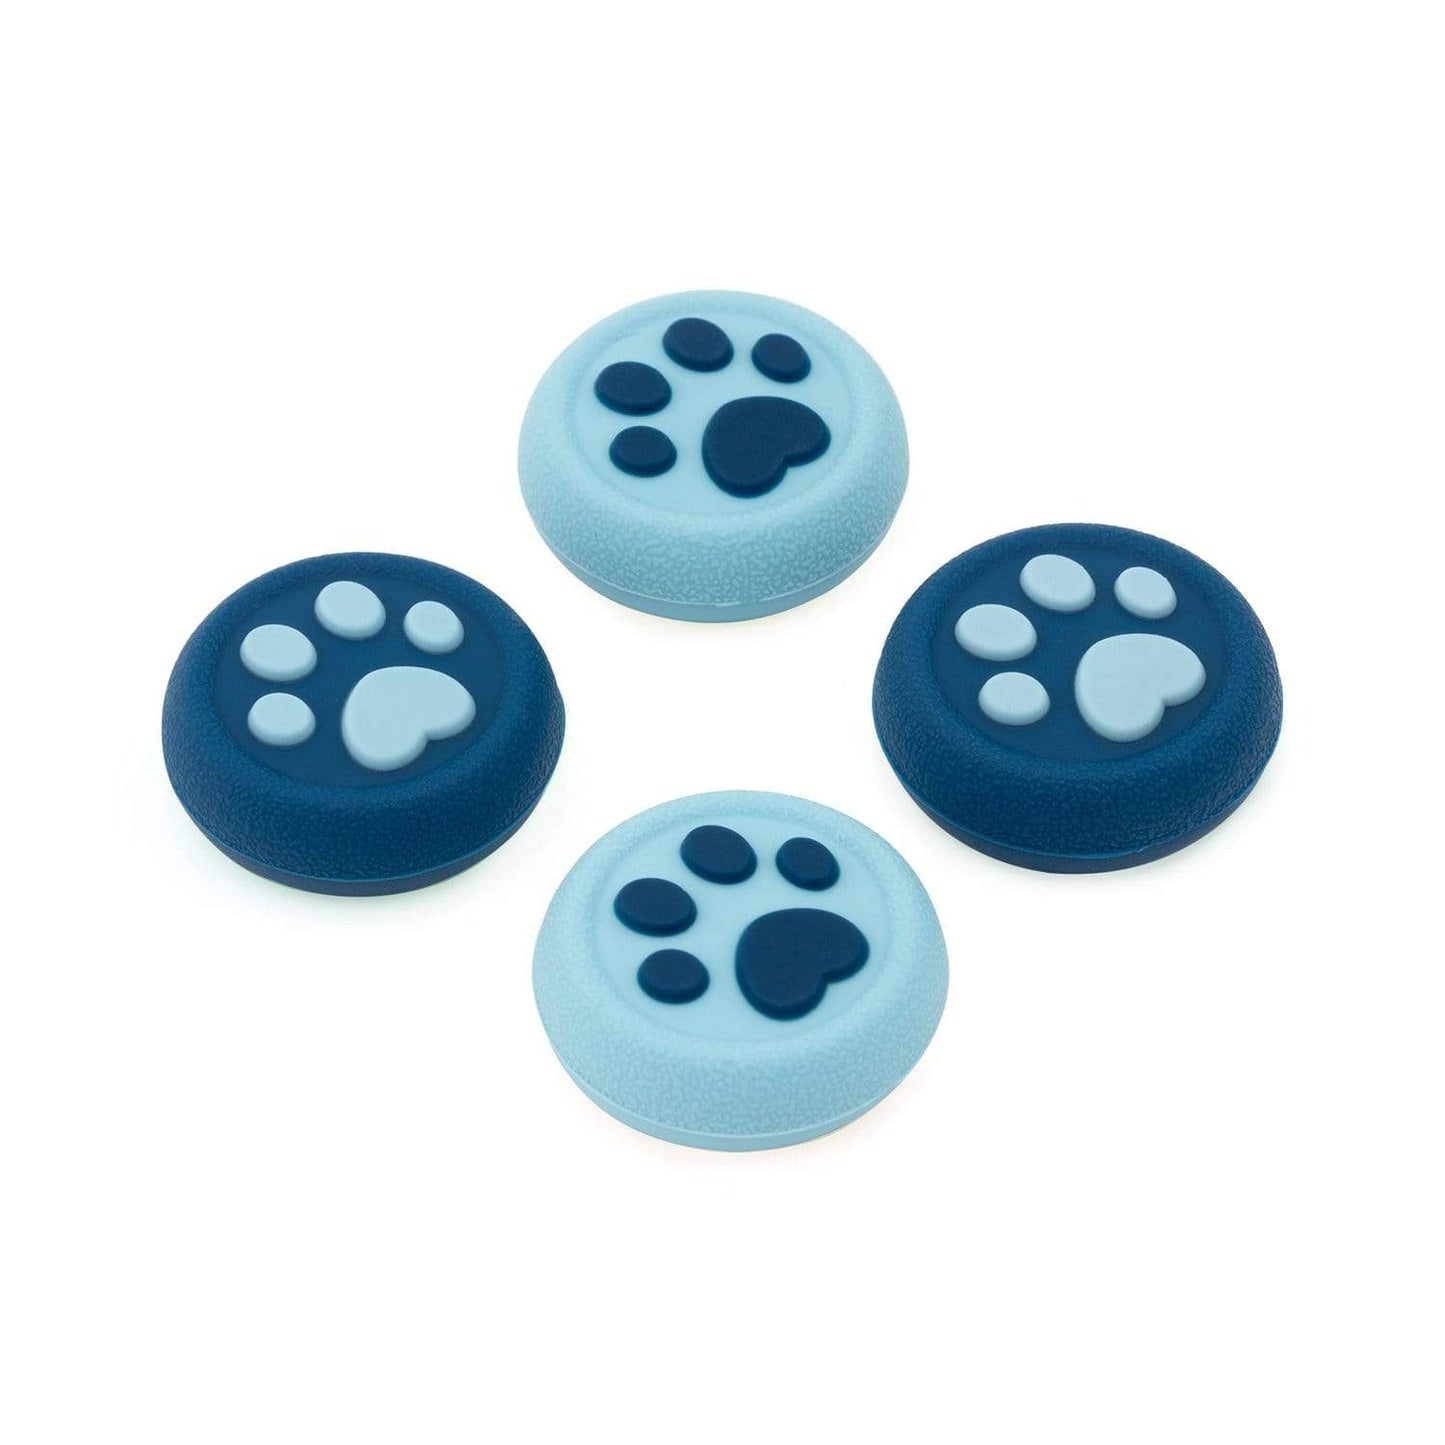 GeekShare Cat Paws Thumb Grip Caps for PS4/PS5 GeekShare Cat Paw Thumb Grip Caps for PS4/PS5 and Switch Pro- 4 PICS, Star Mist Blue